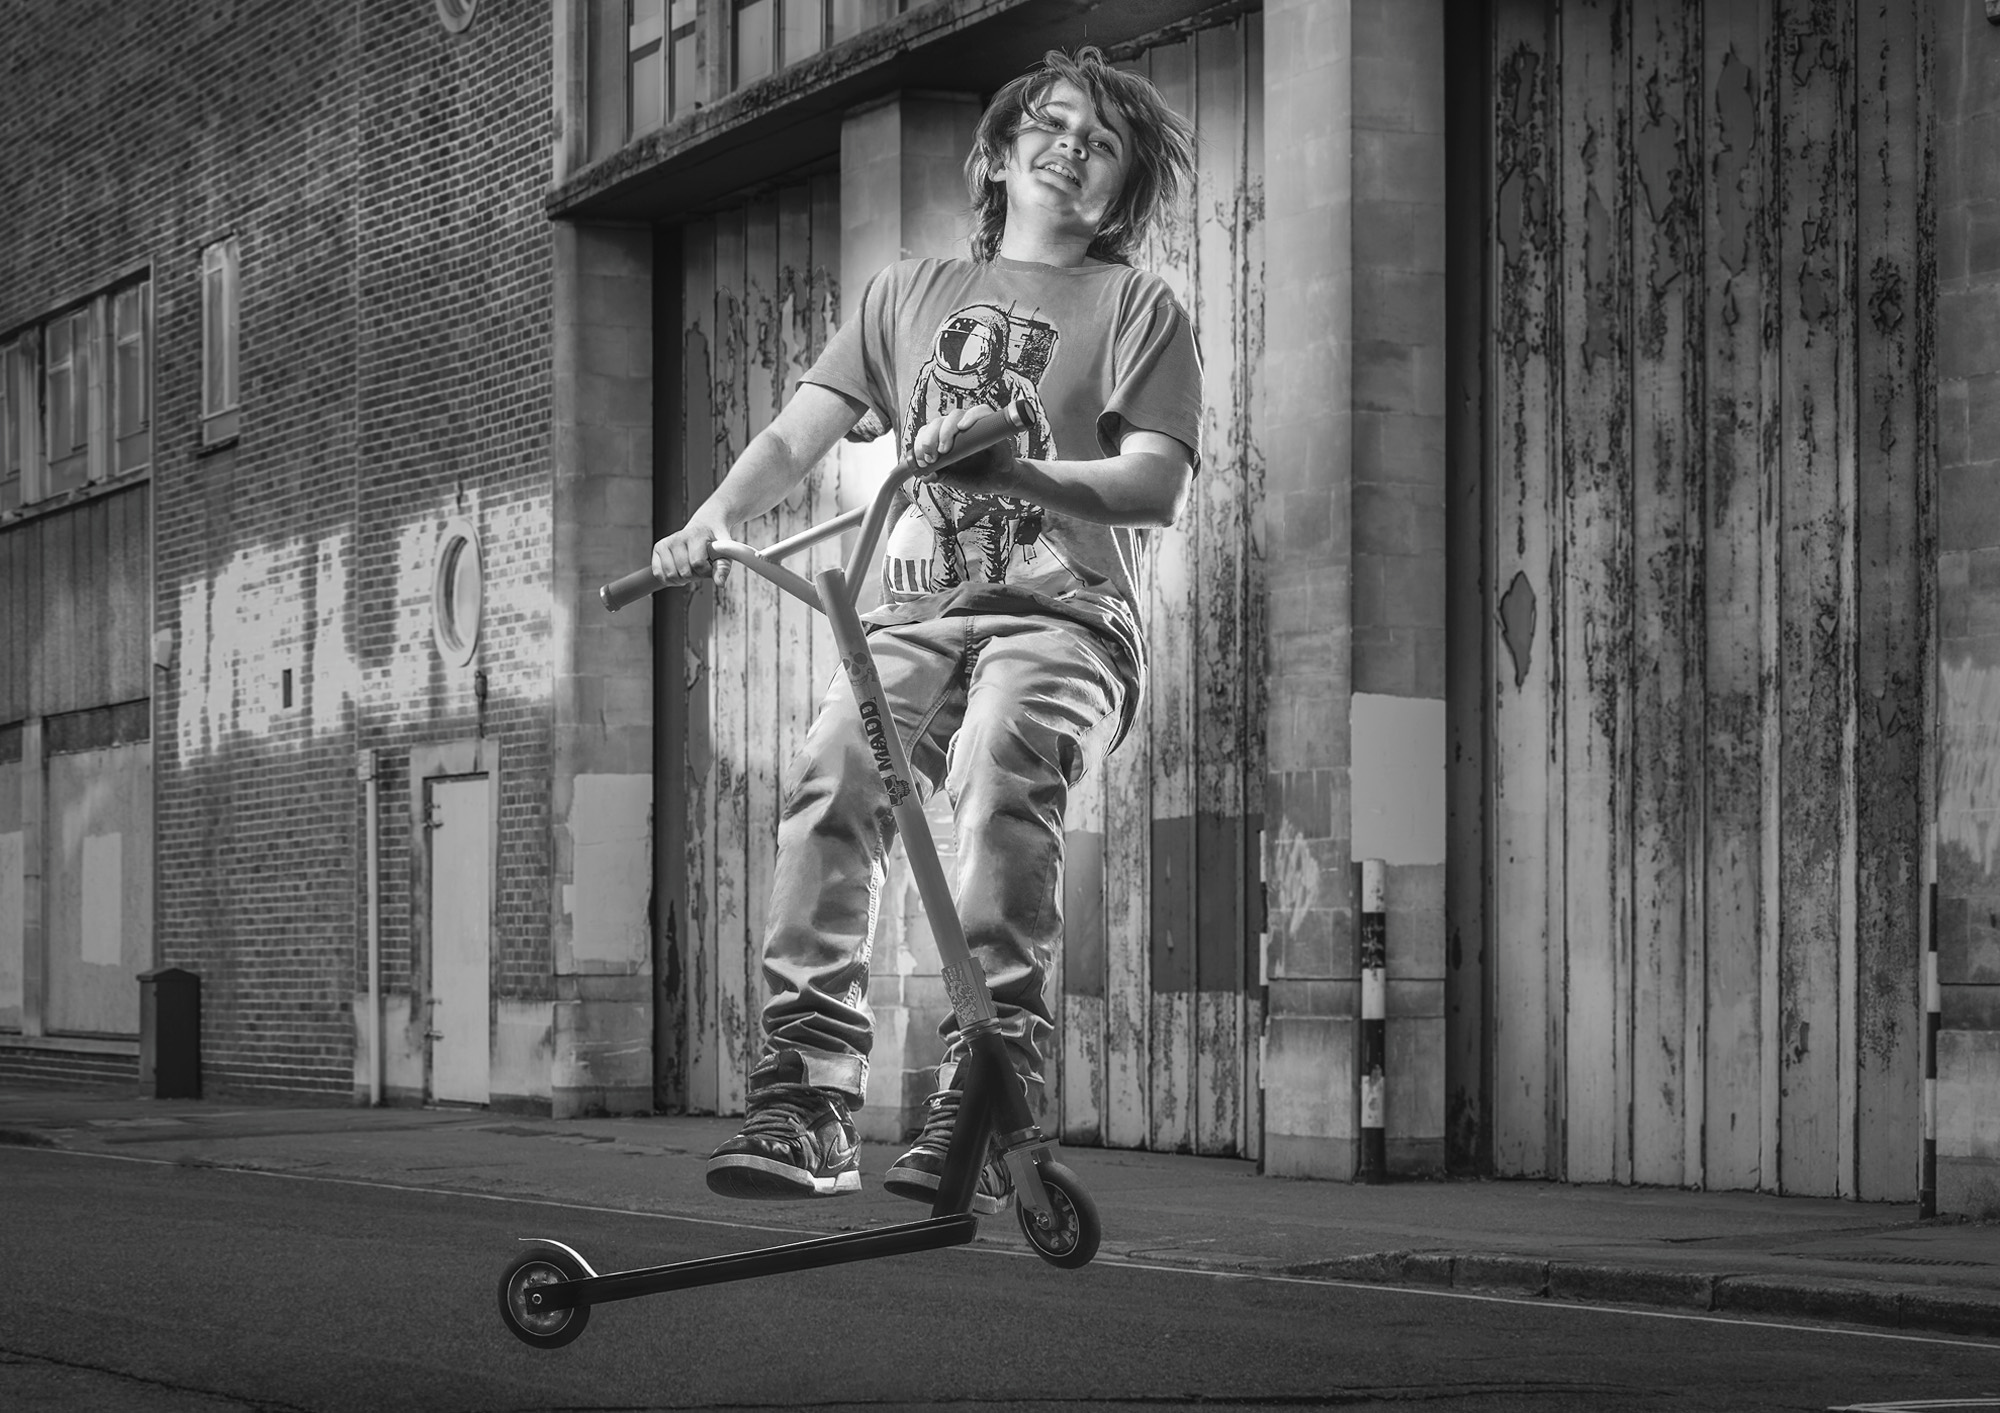 B/W photograph of boy in mid air spin on a push scooter